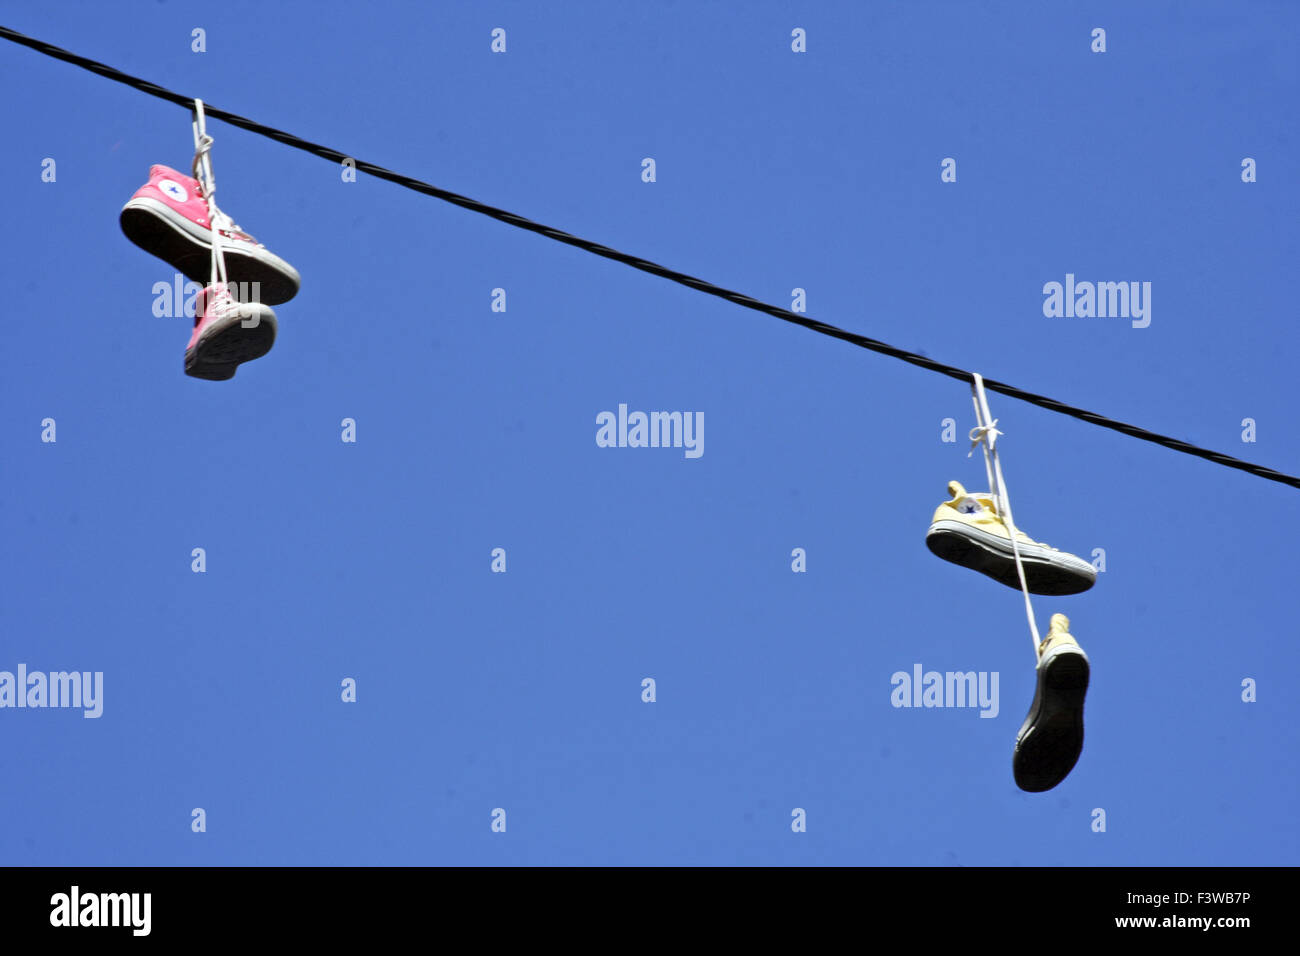 Converse hanging on lines in Ibiza Stock Alamy